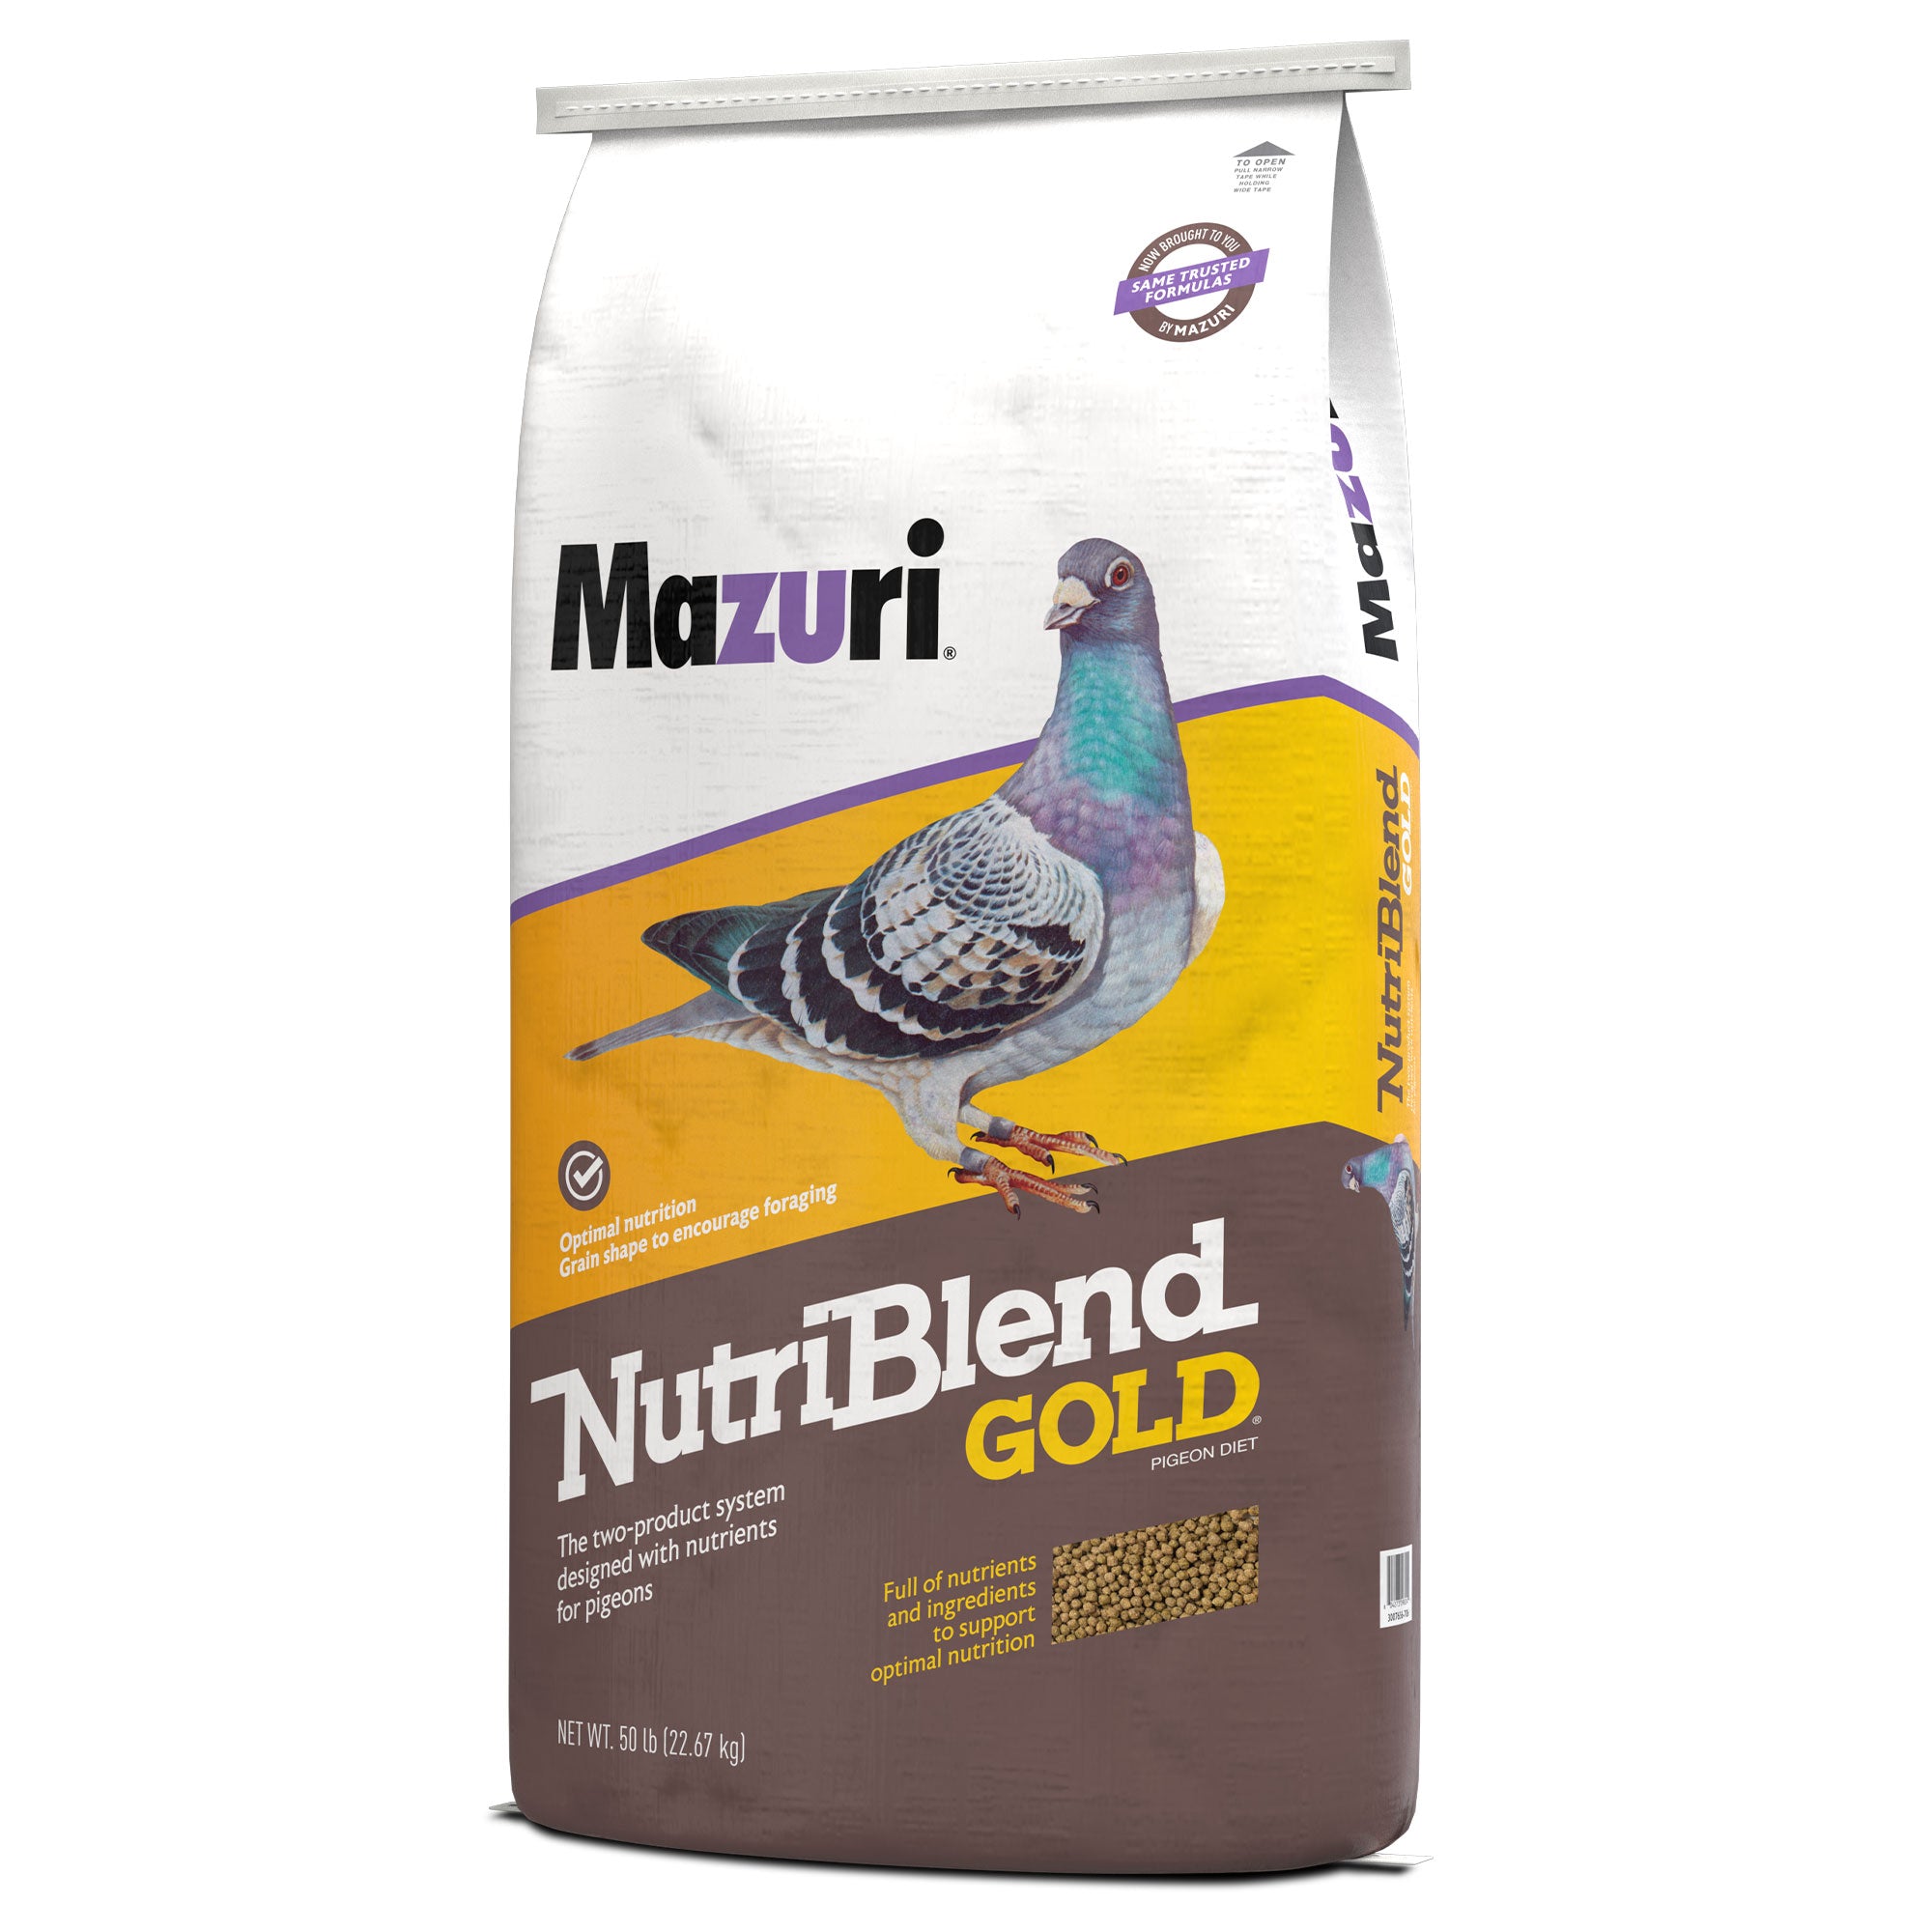 Mazuri NutriBlend Pigeon gold and brown bag showing right gusset